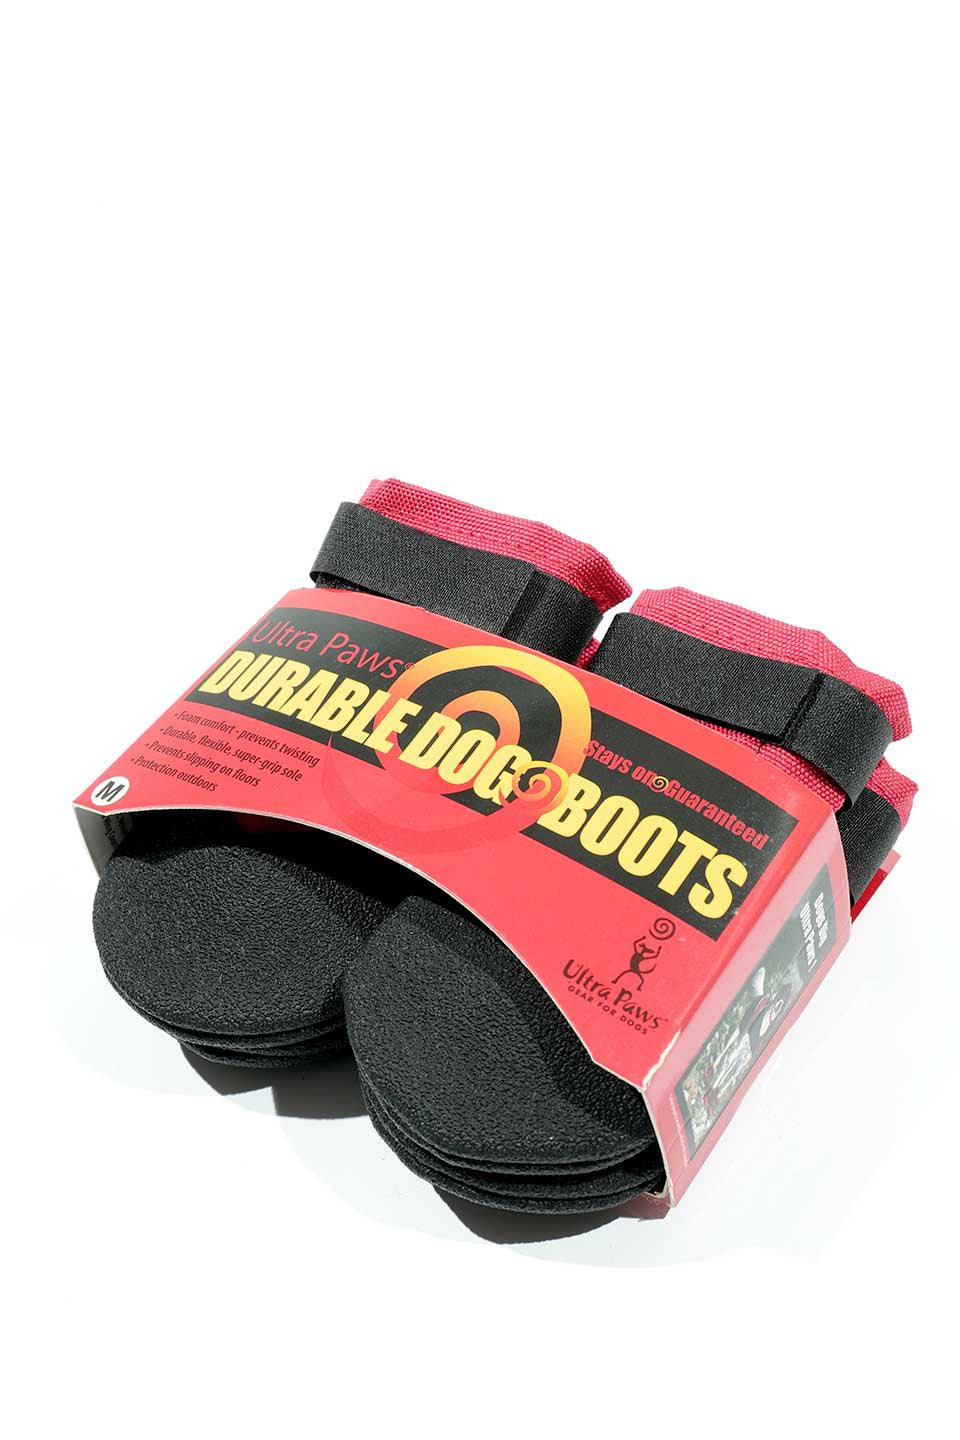 Durable Dog Boots オールラウンド・ドッグブーツ / Ultra Paws